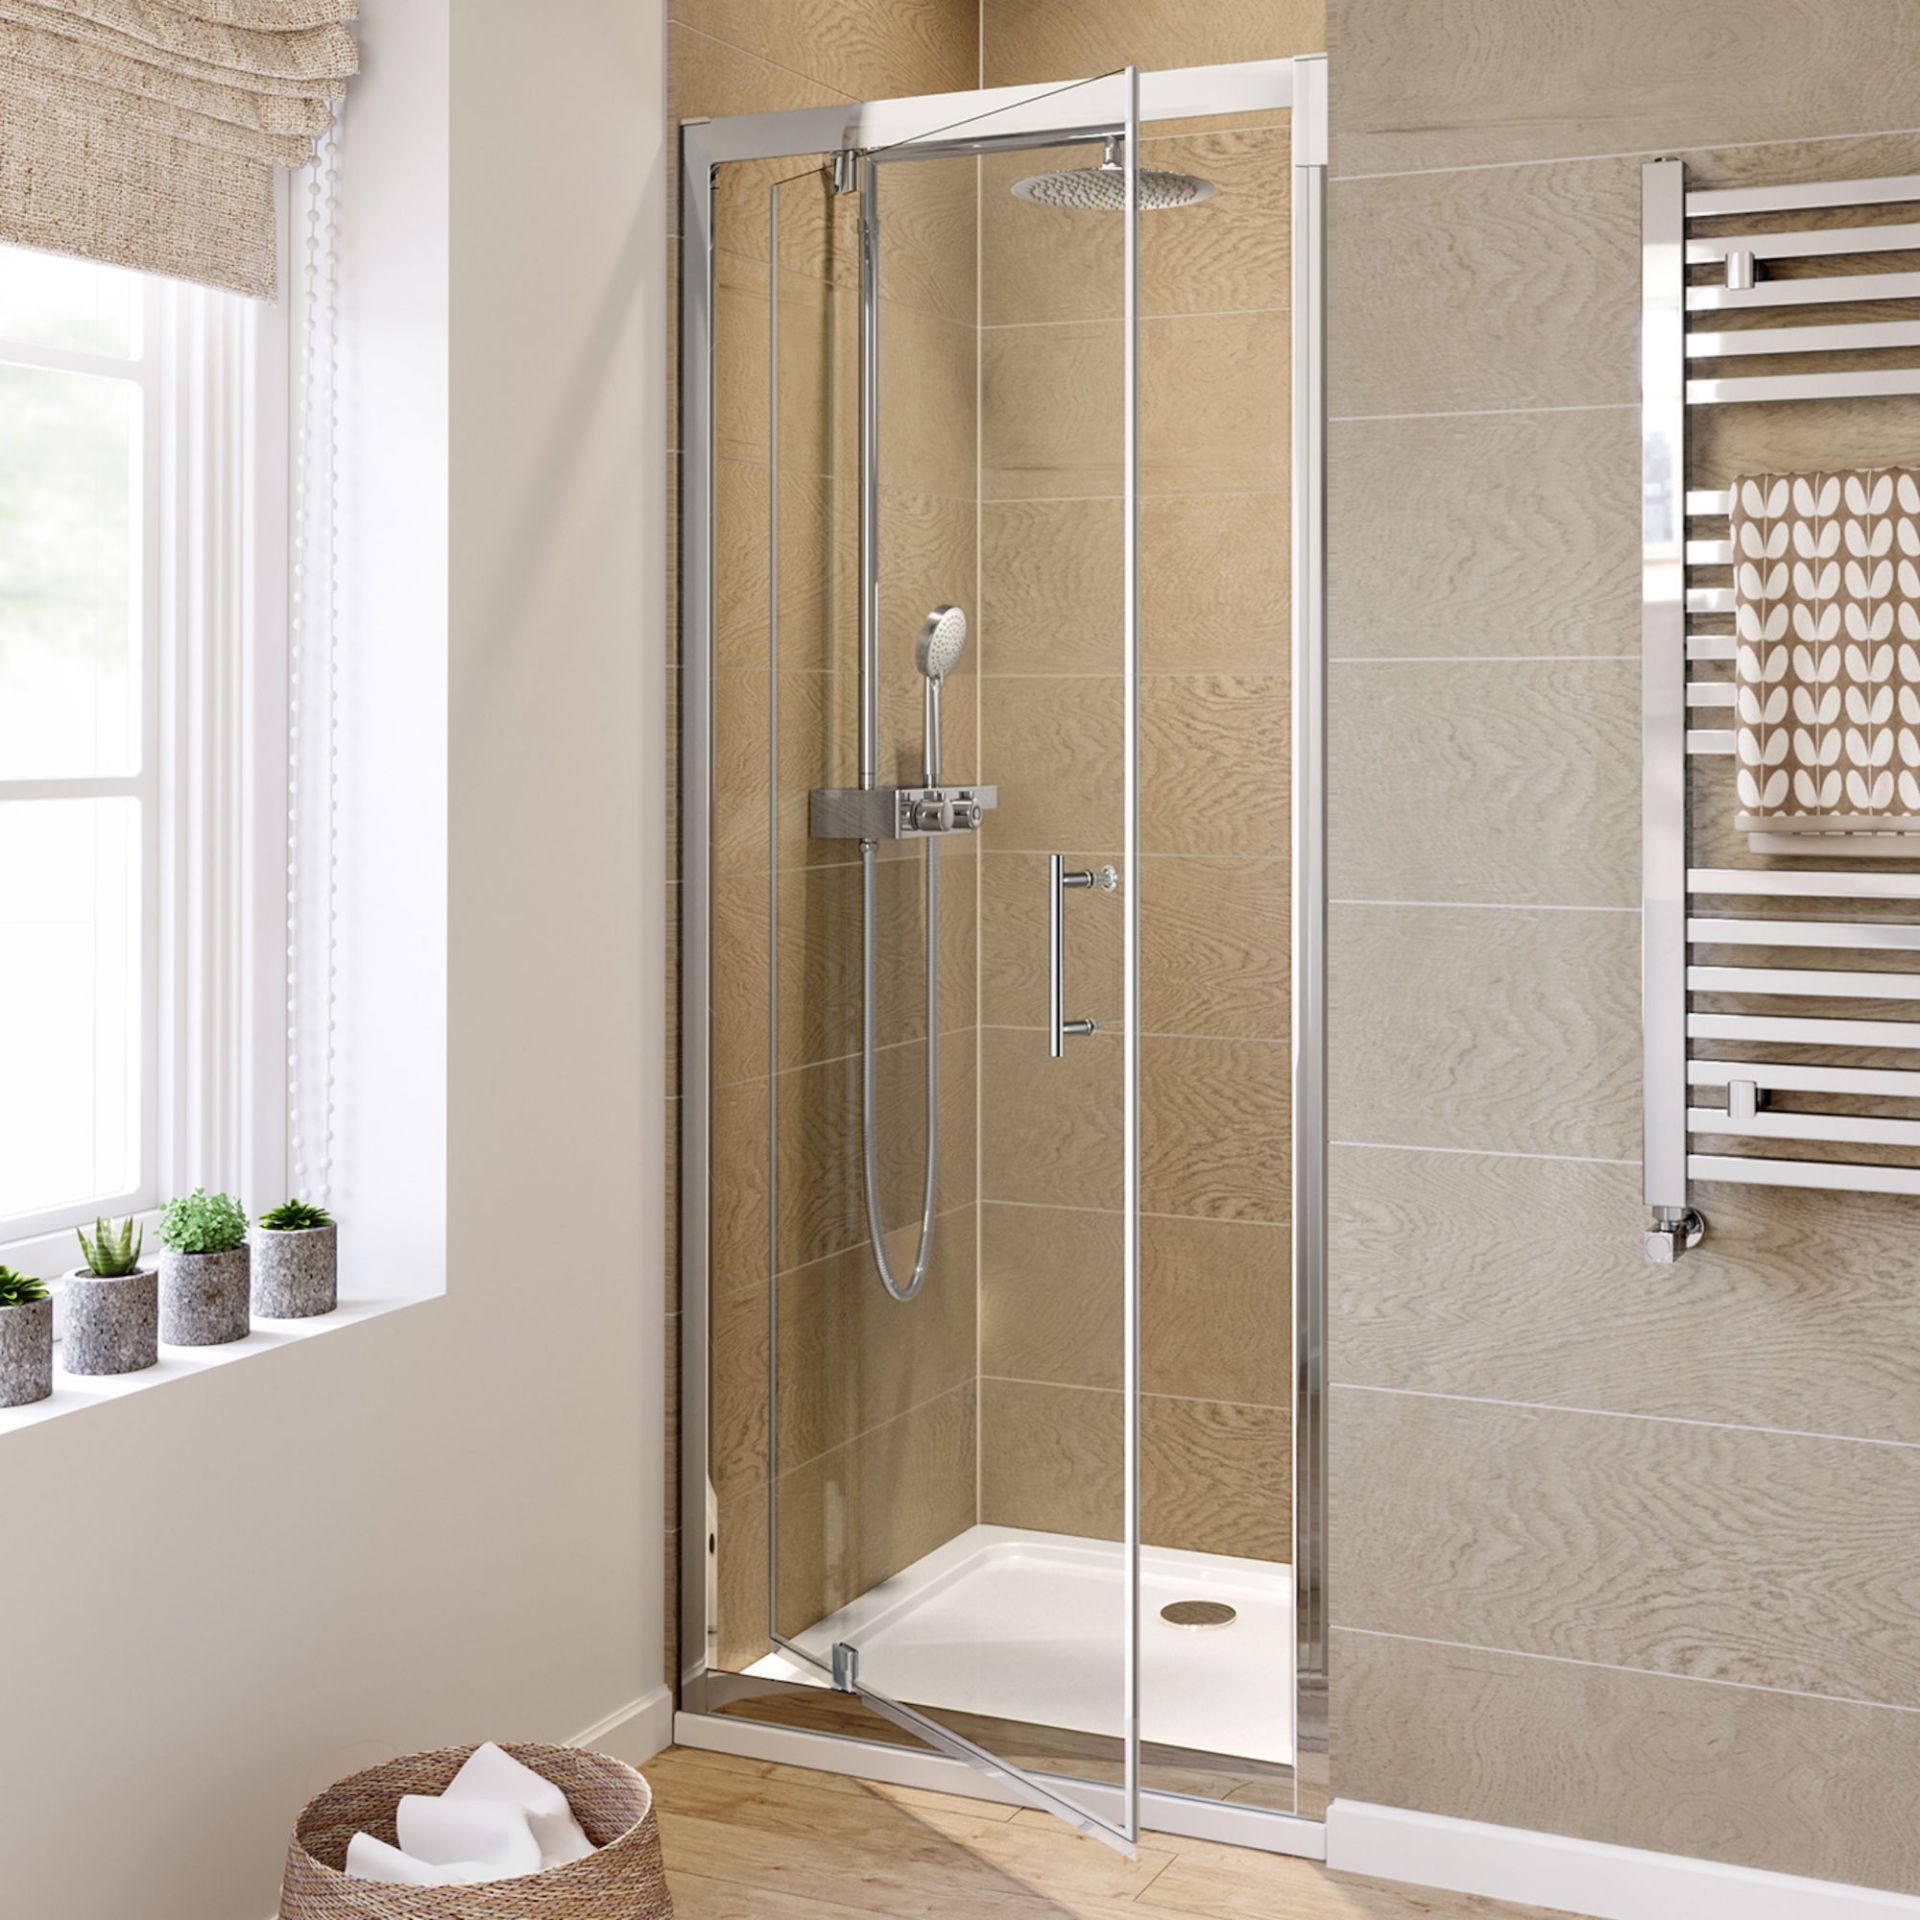 New (W50) 6mm - Elements Pivot 760mm Shower Door. 6mm Safety Glass Fully Waterproof Tested. ...